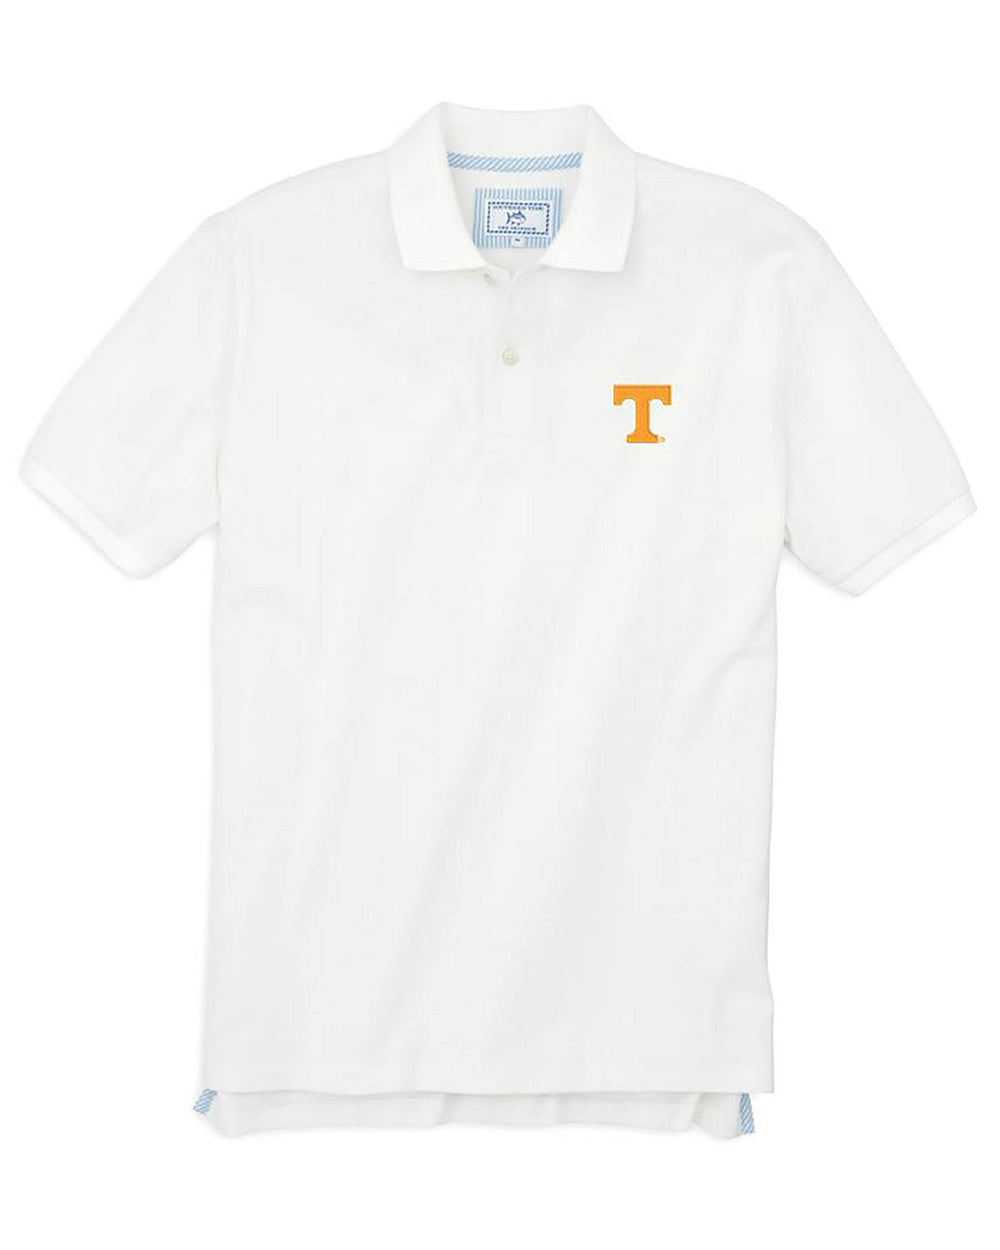 The front view of the Men's White Tennessee Vols Pique Polo Shirt by Southern Tide - Classic White